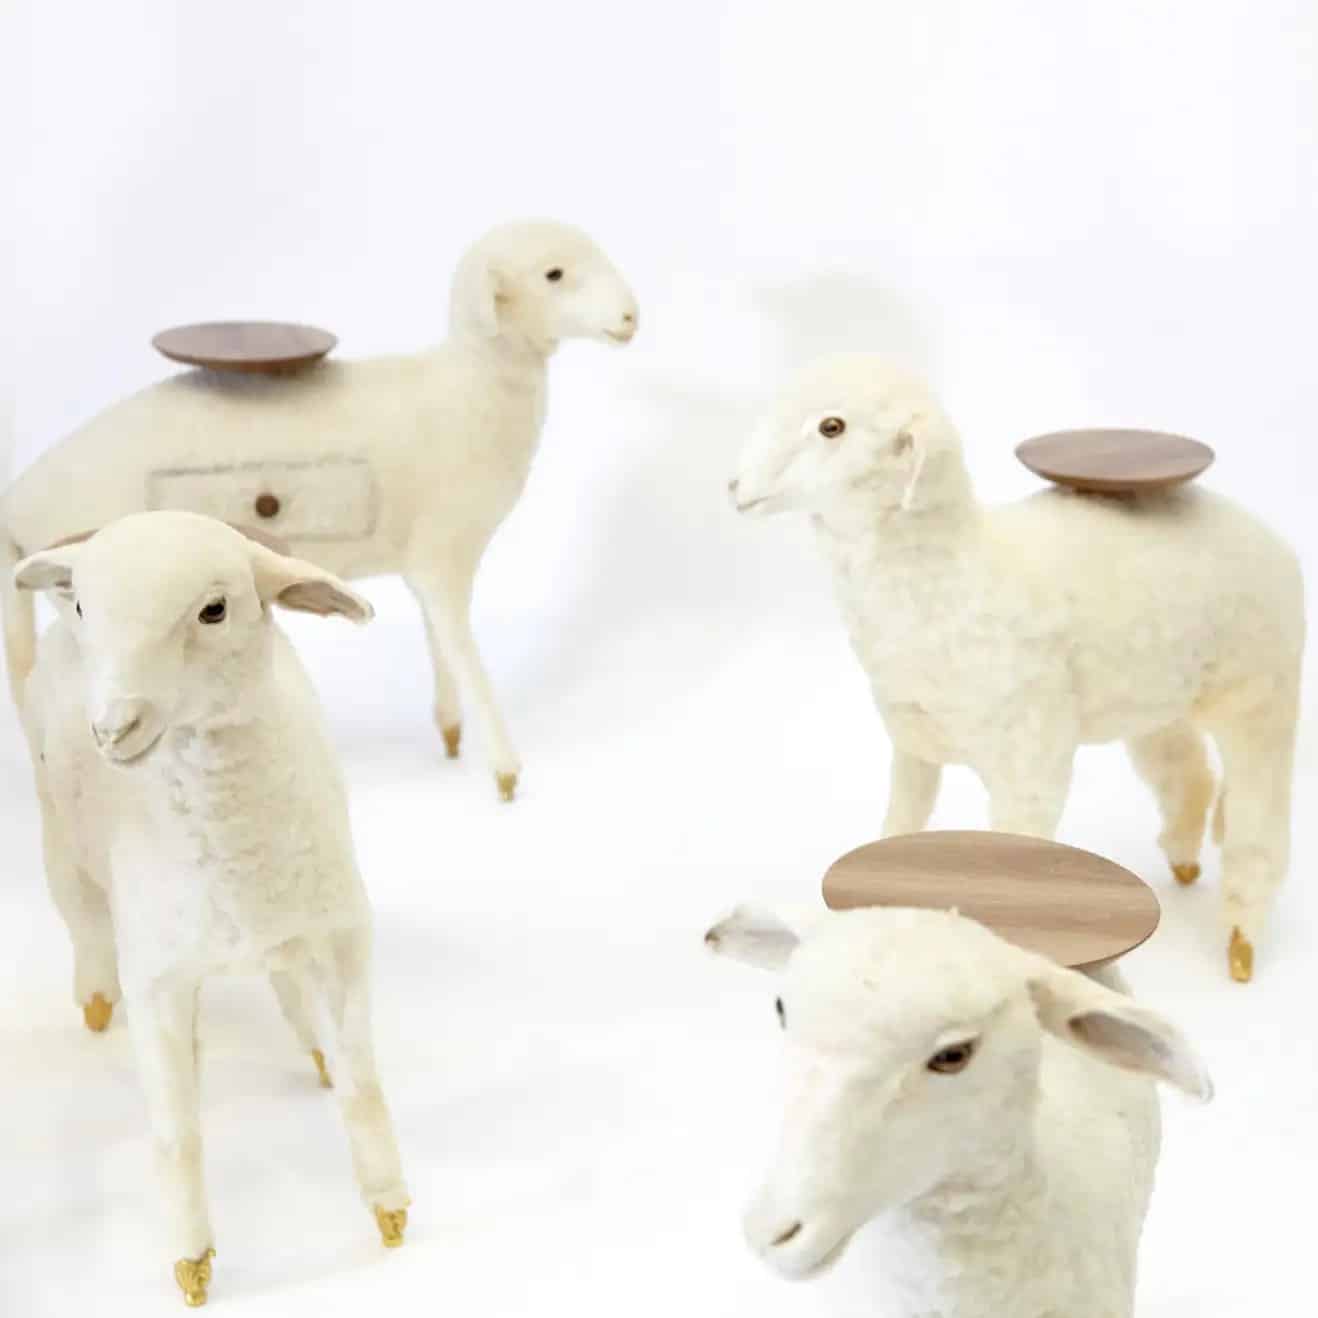 These Surreal and Sustainable Lamb Tables Are Based on a 1942 Dalí Painting